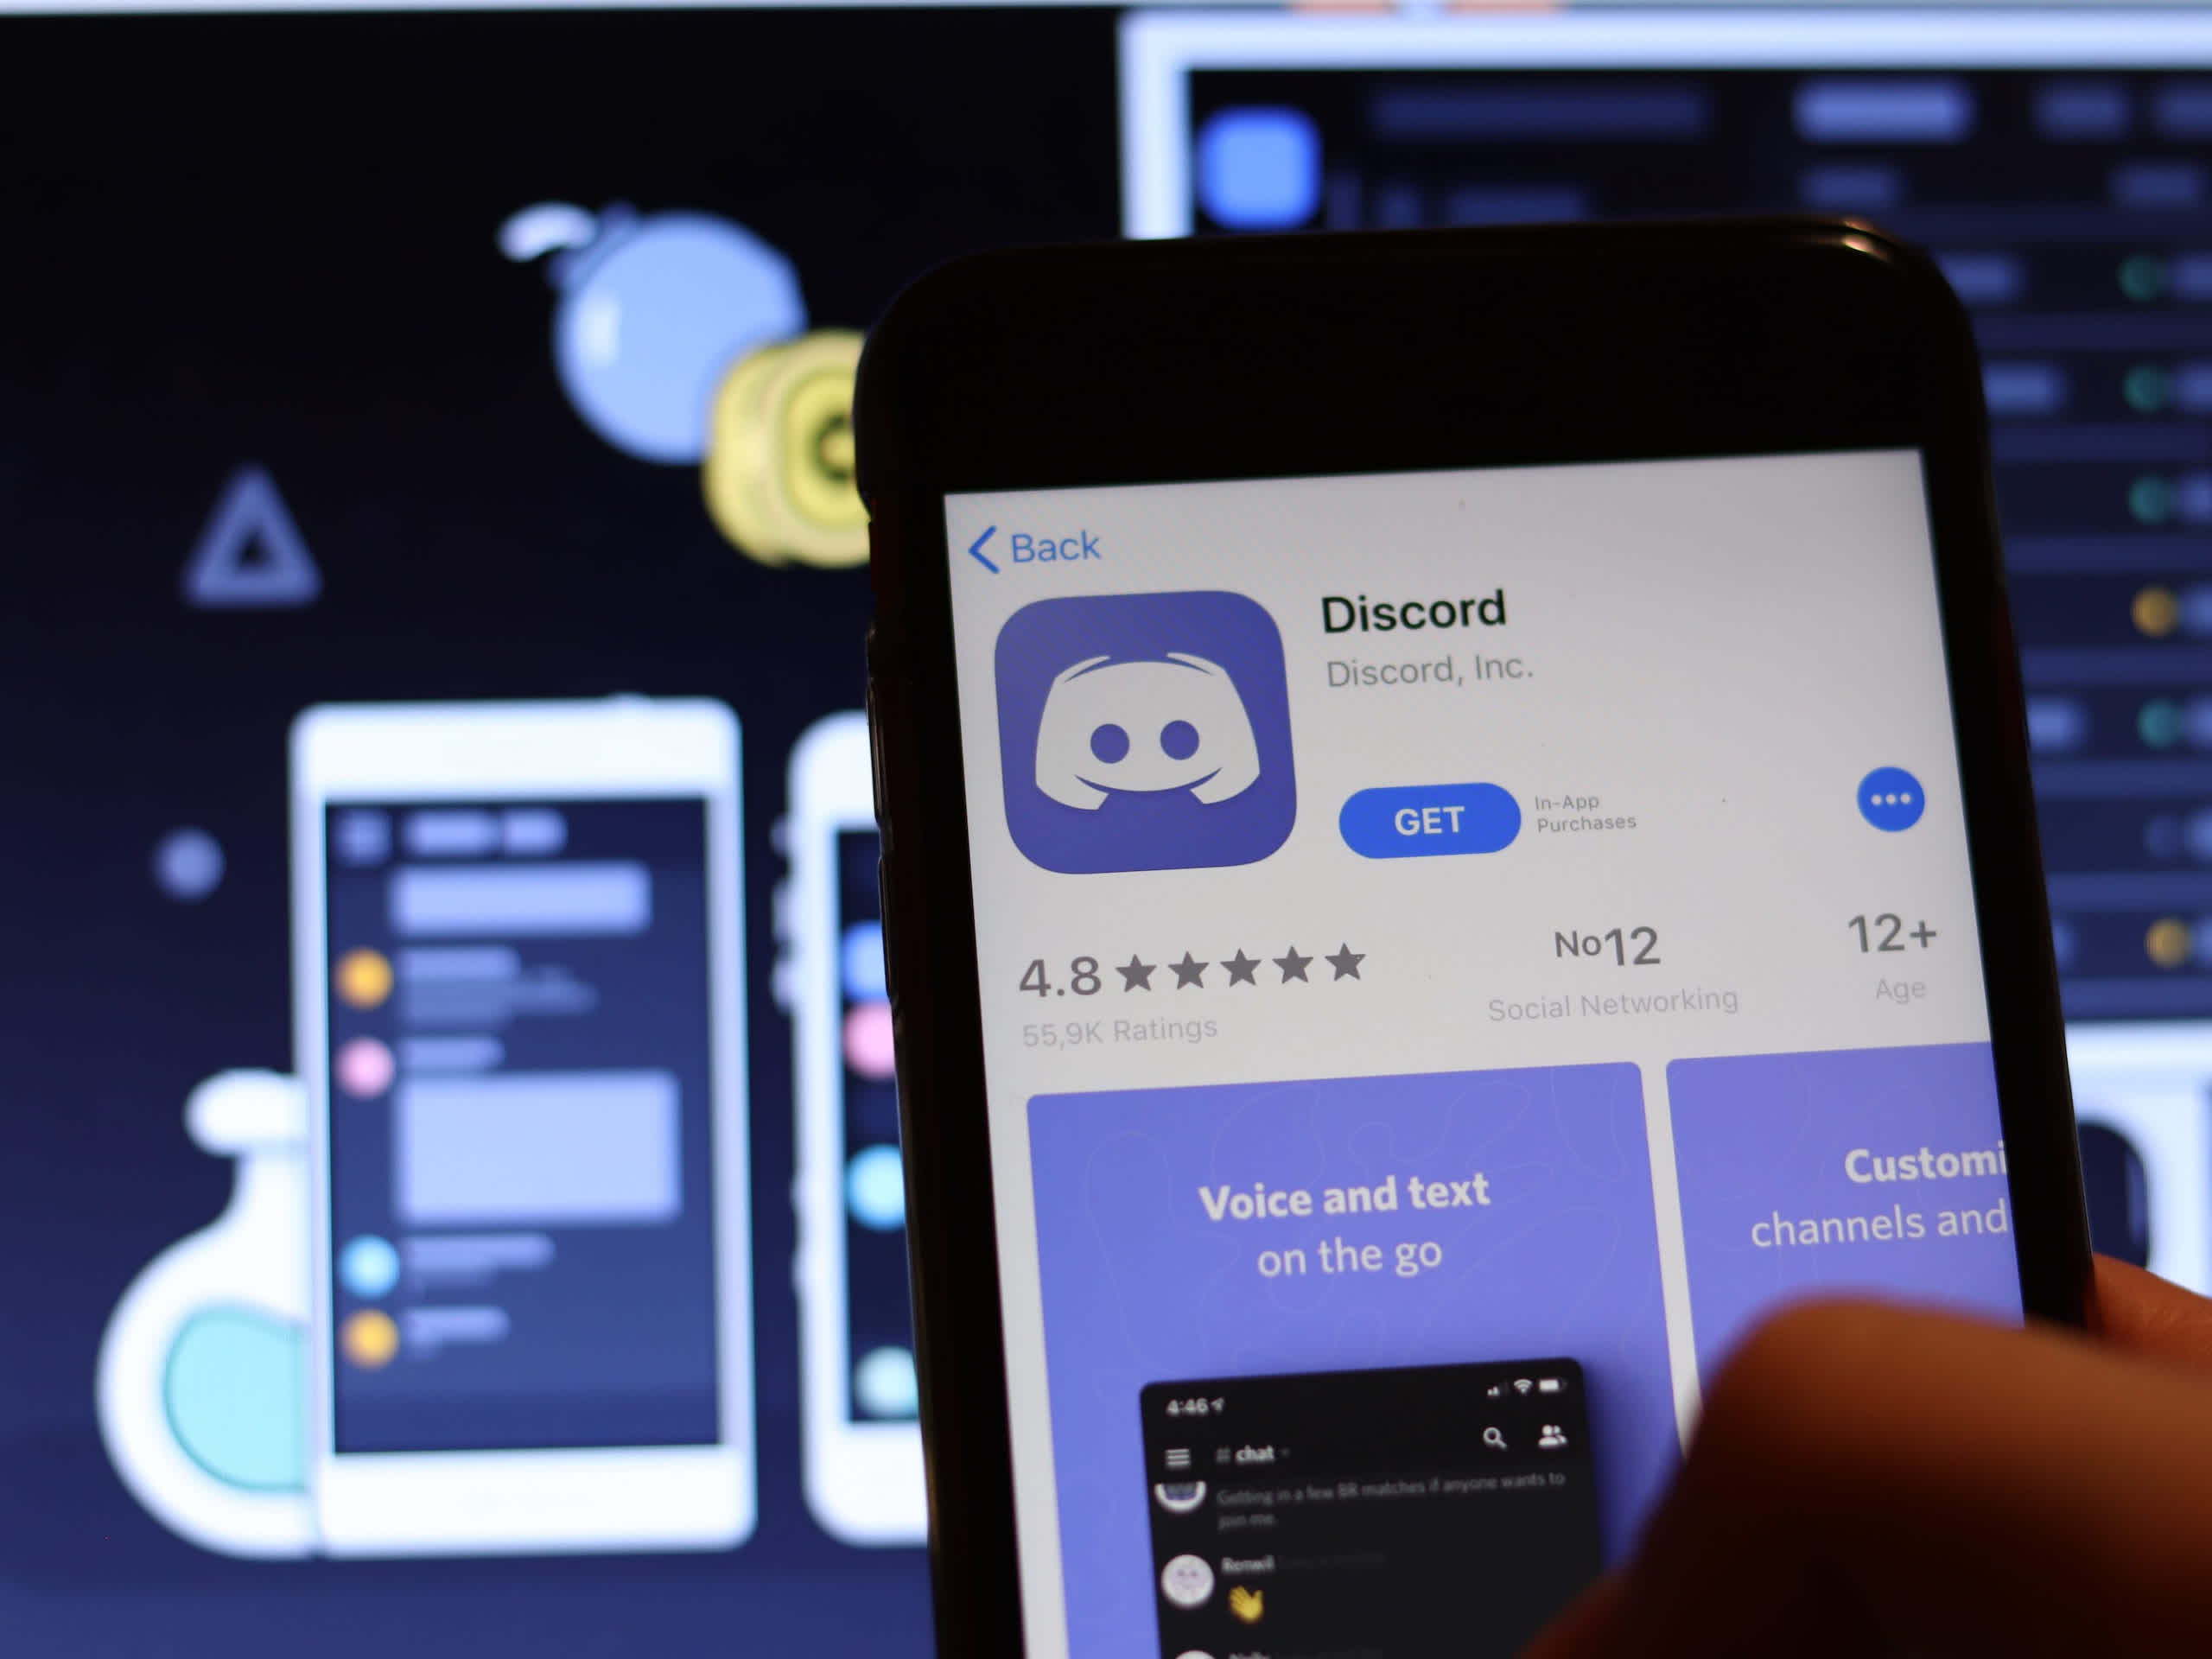 You'll have to change your Discord username soon